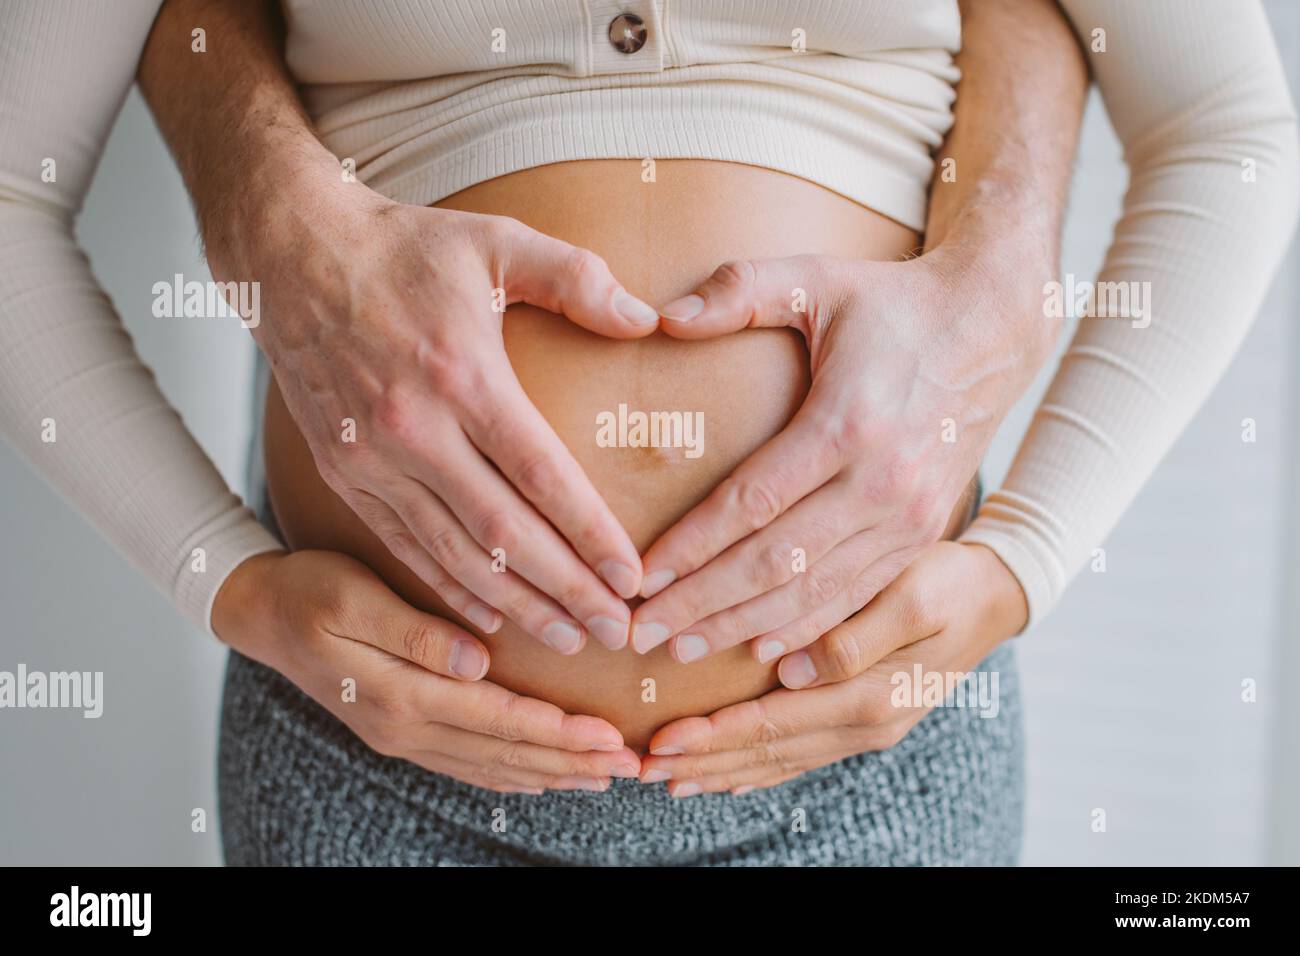 Loving parents heart shape hands on pregnant woman belly. Expecting couple in love pregnancy closeup photo of belly. Stock Photo